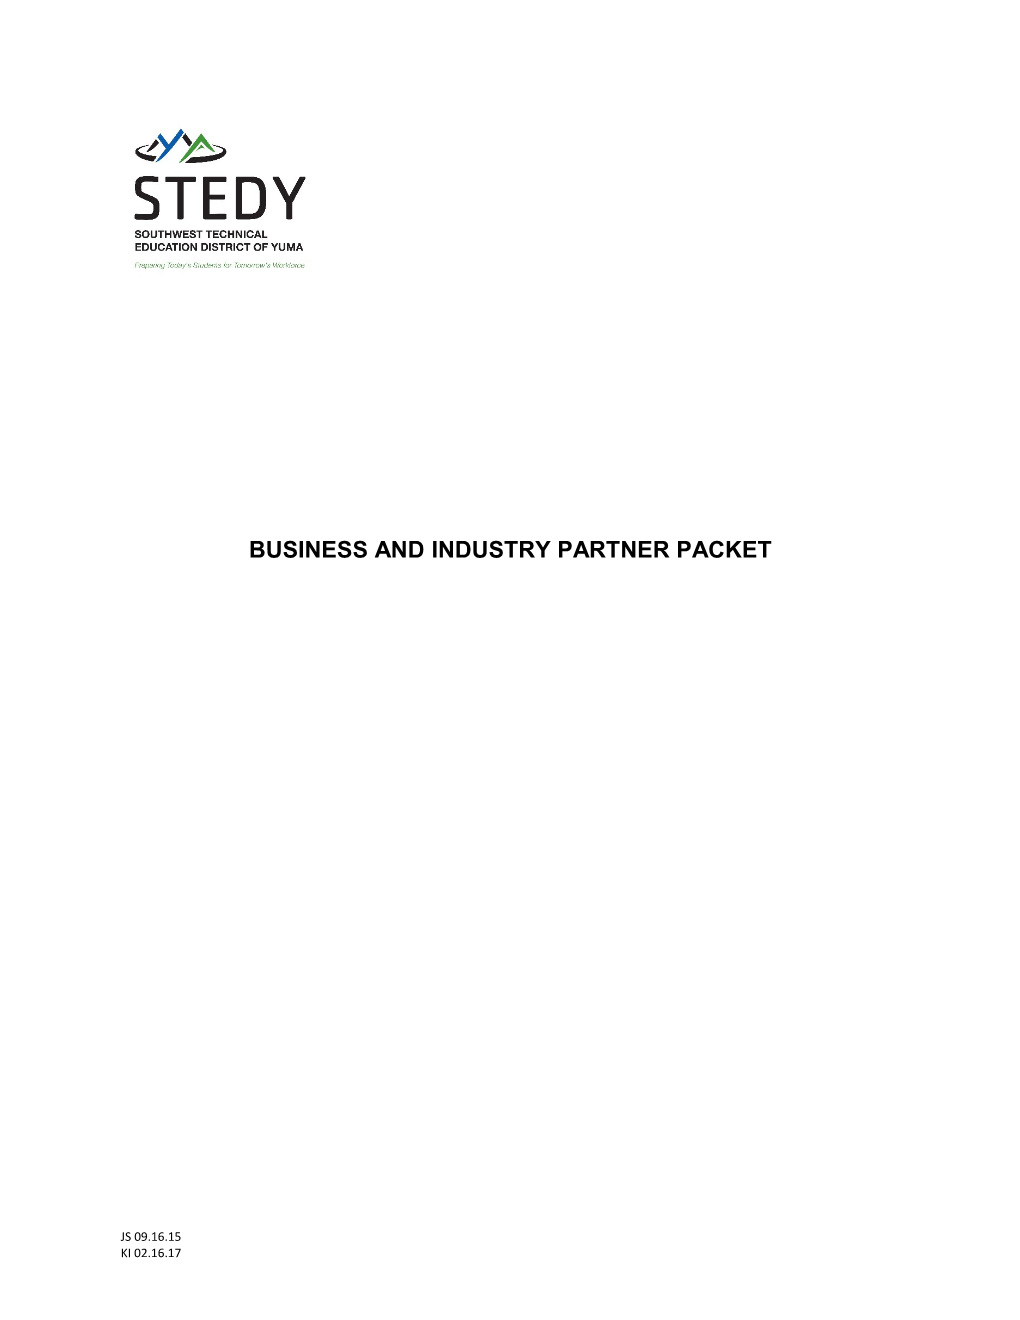 Business and Industry Partner Packet